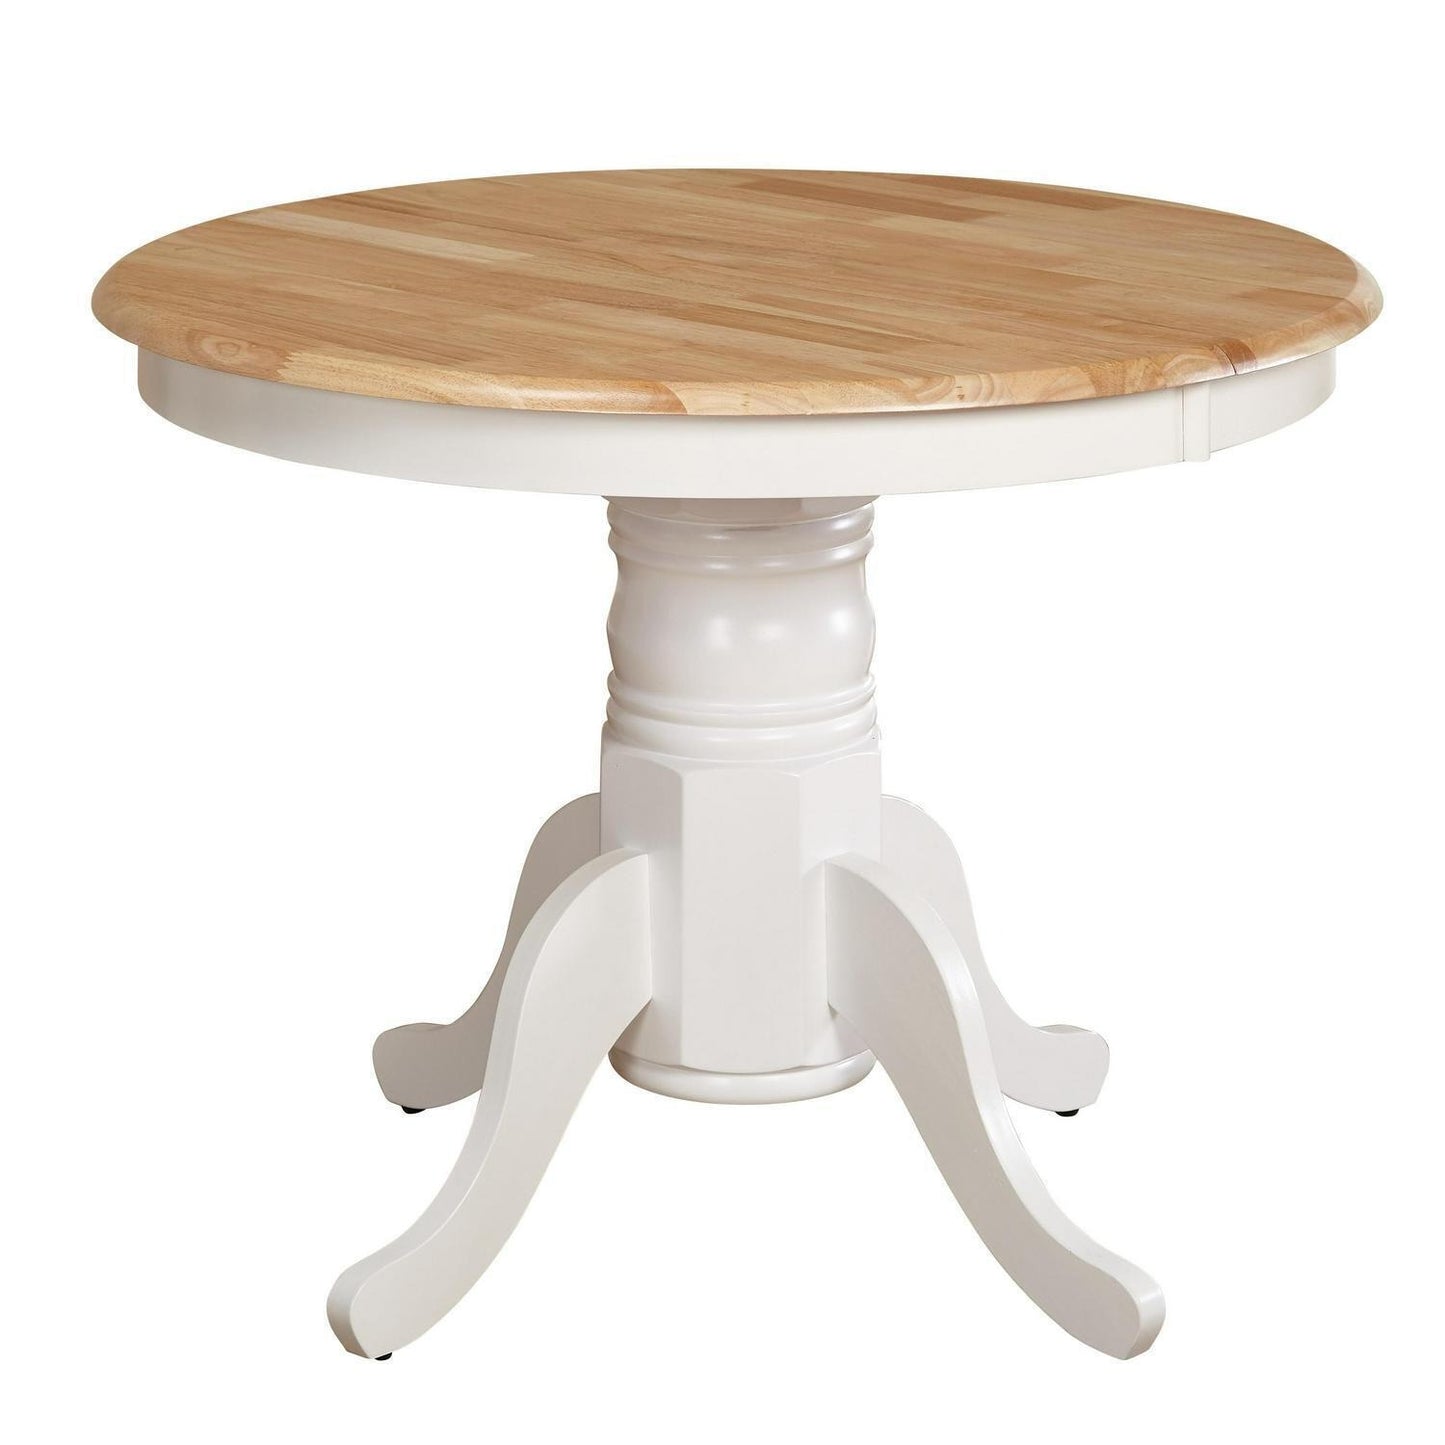 Country Style Pedestal Table: Solid Wood w/ 22in Leaf - White Finish, Nat Top